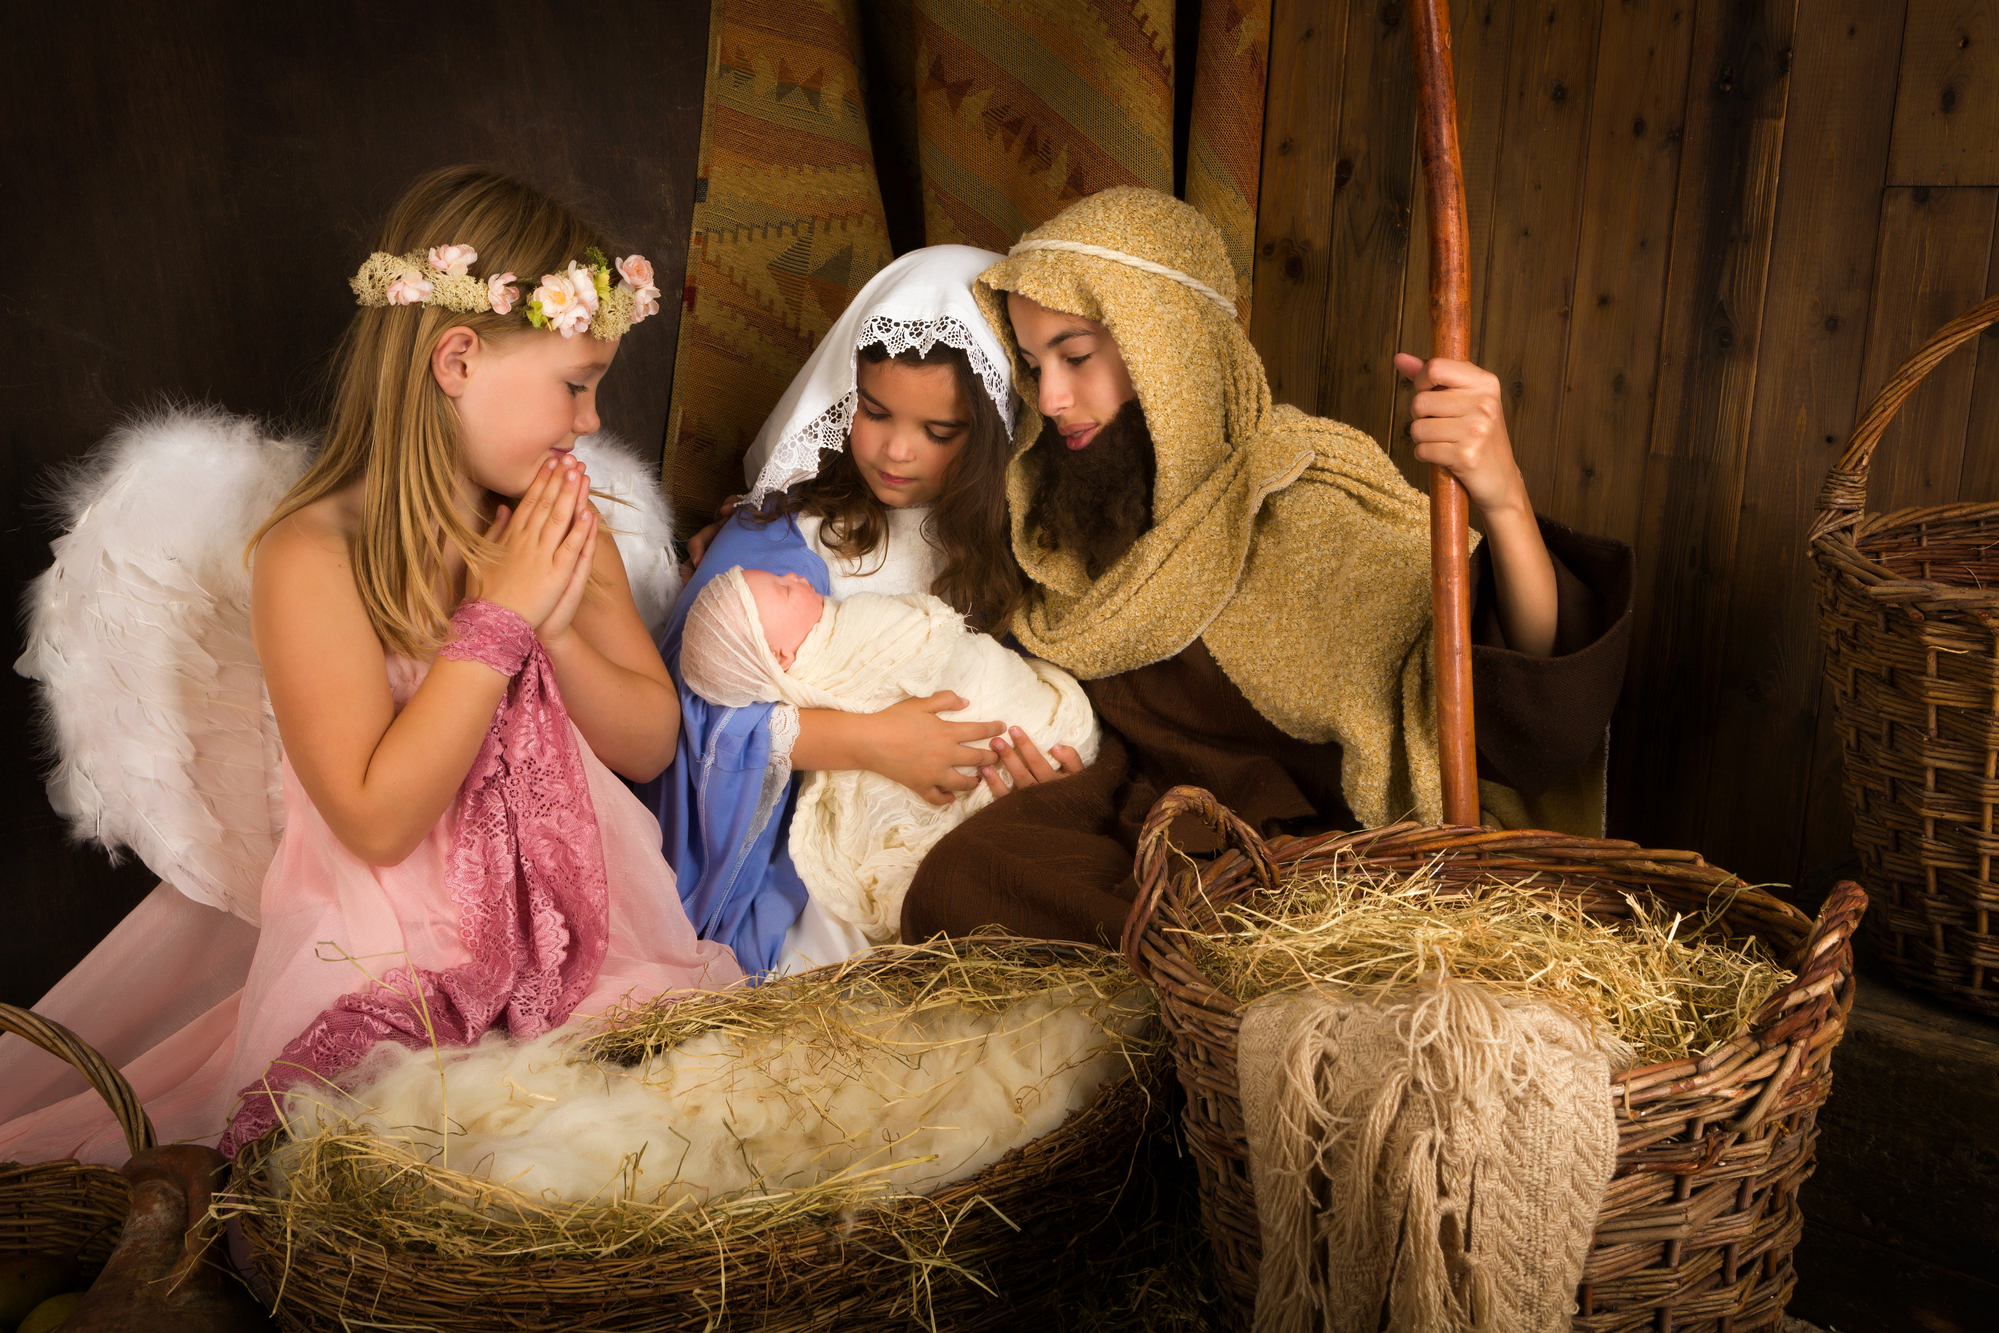 Christmas nativity play with kids as actors